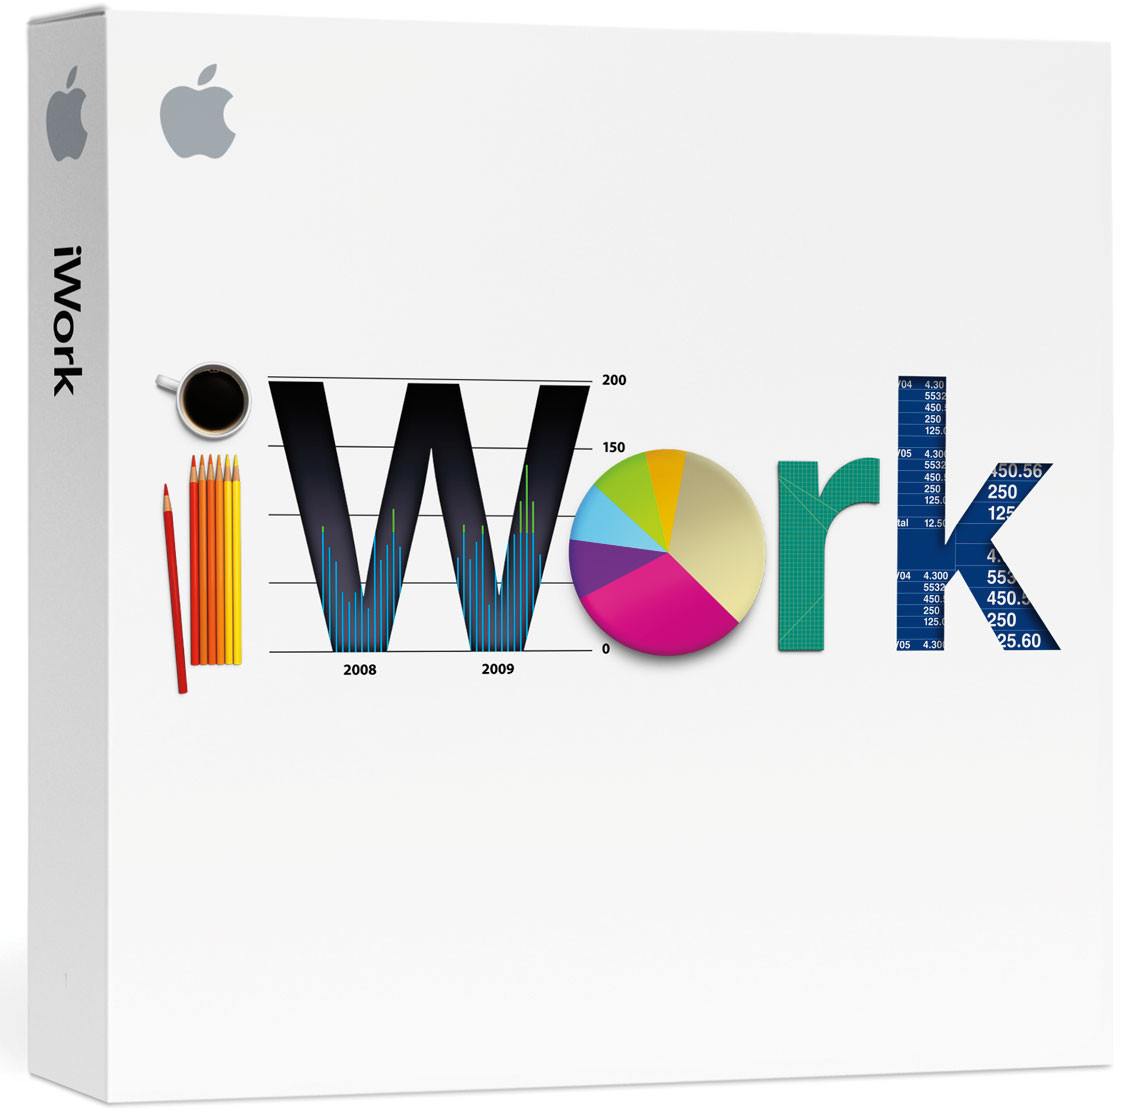 Is lightworks free